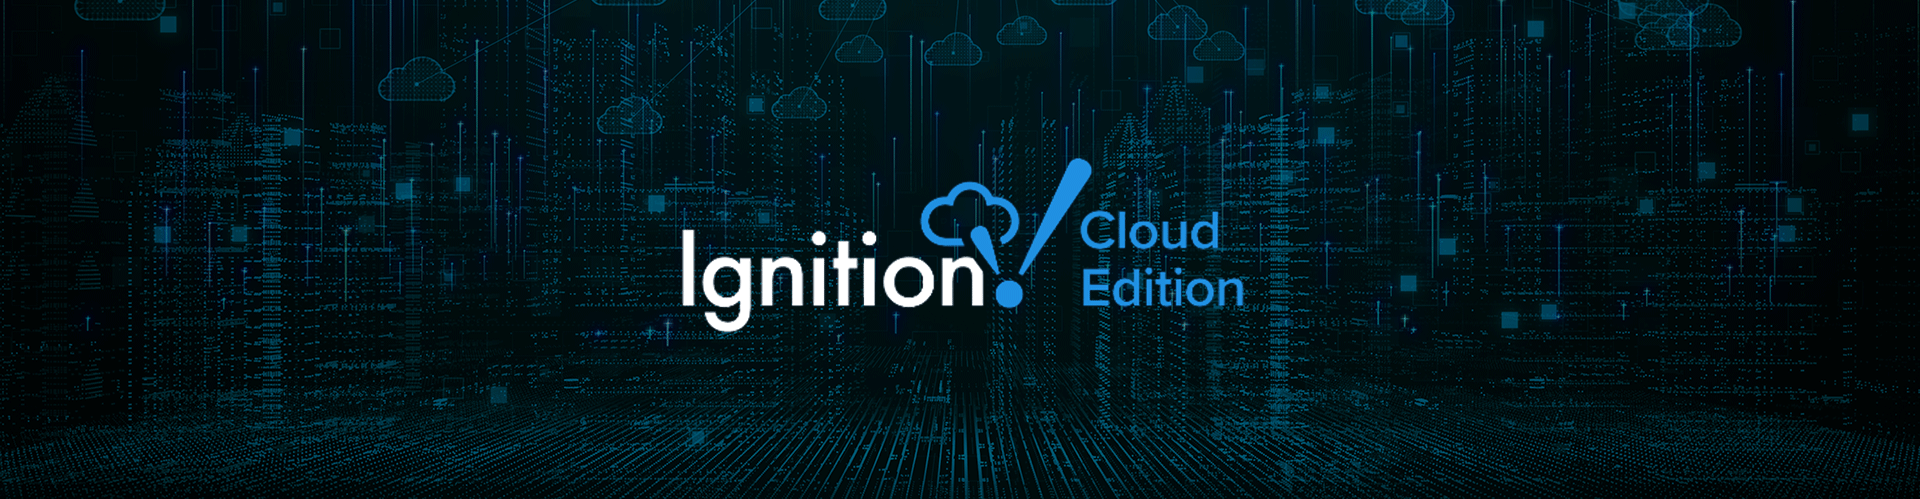 4 Reasons Why Engineers Should Be Excited About Ignition Cloud Edition